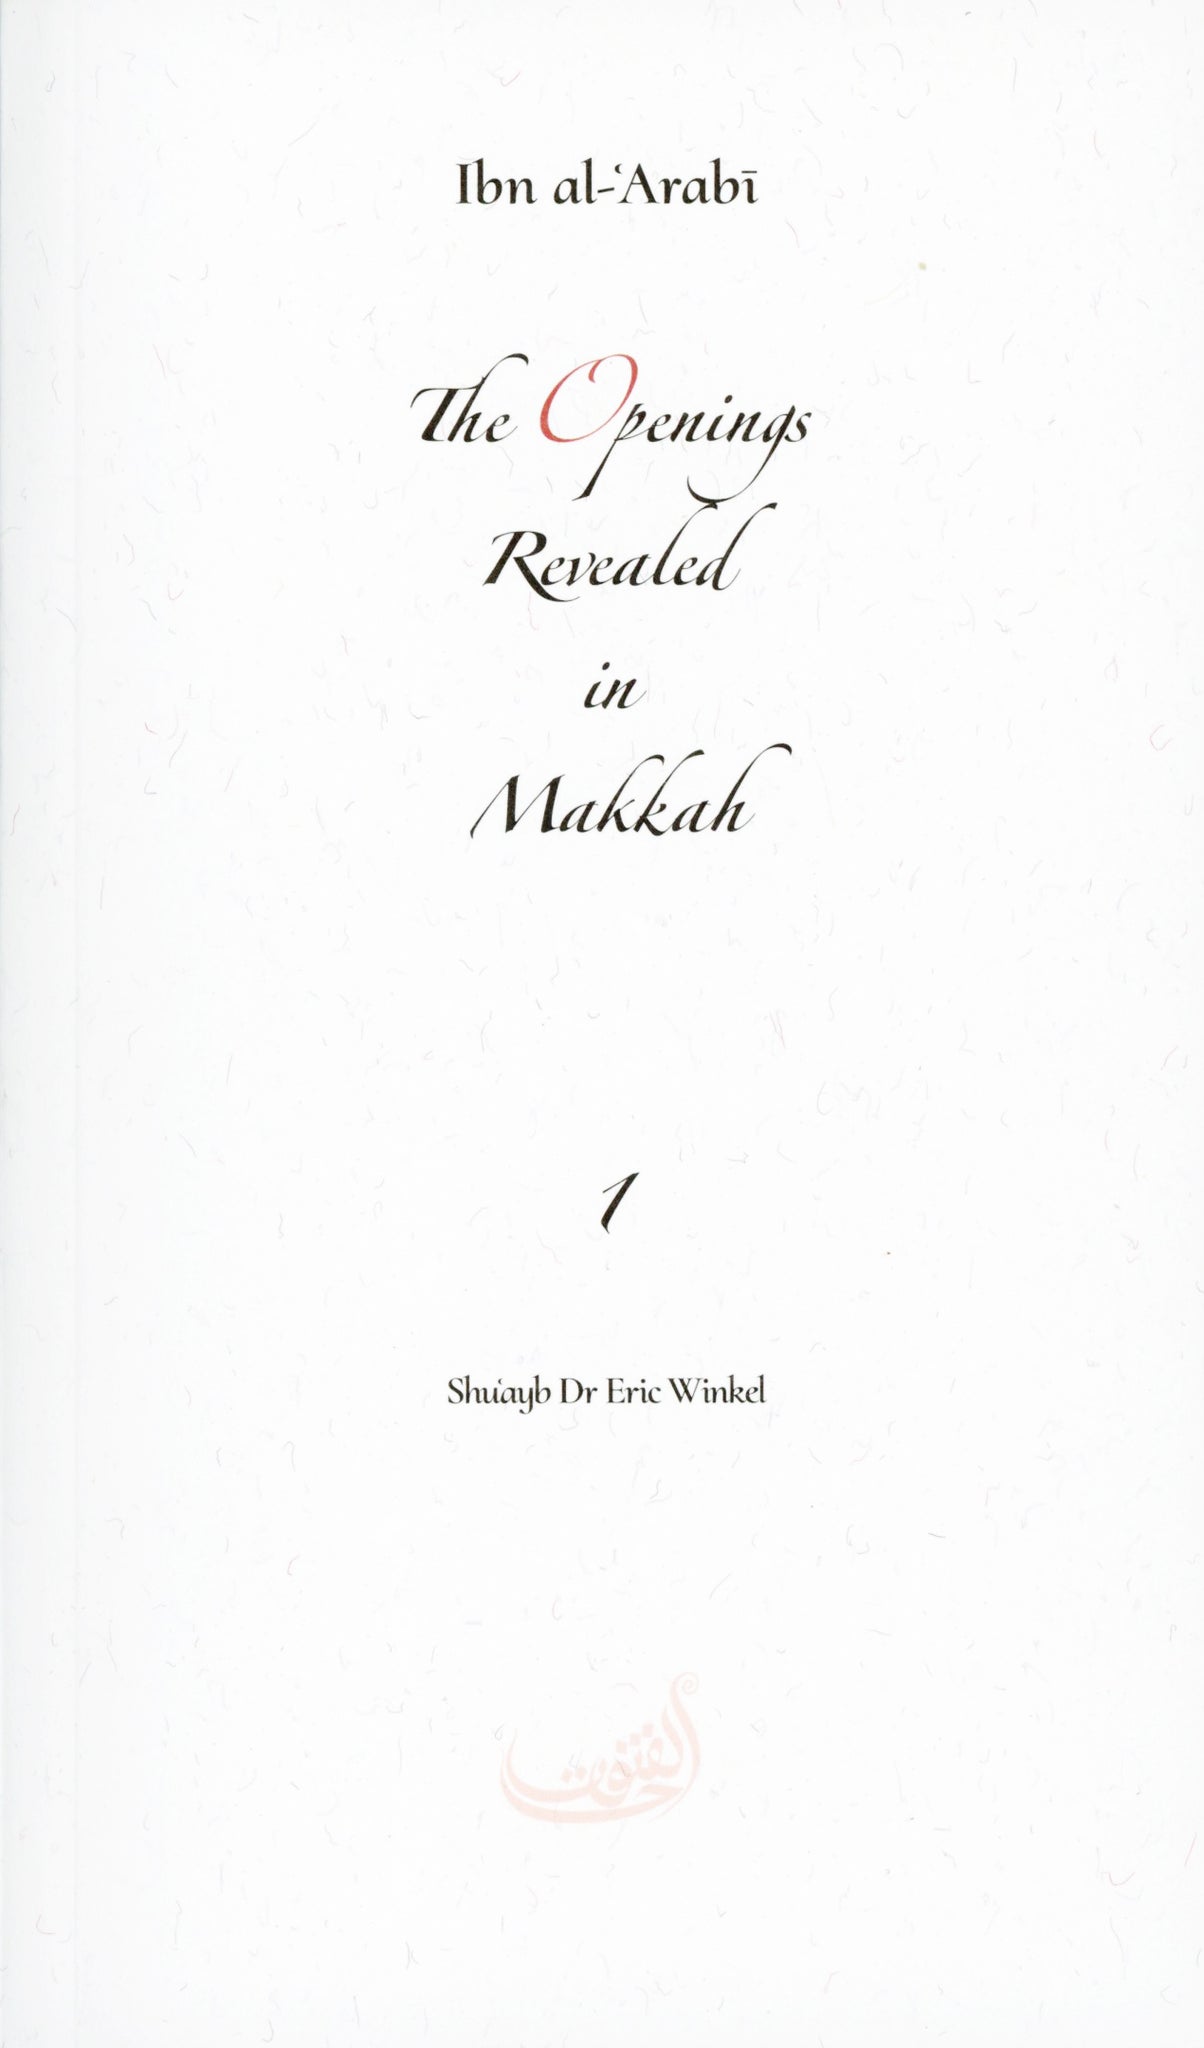 Book 01 - The Openings Revealed in Makkah, Taschenbuch Series